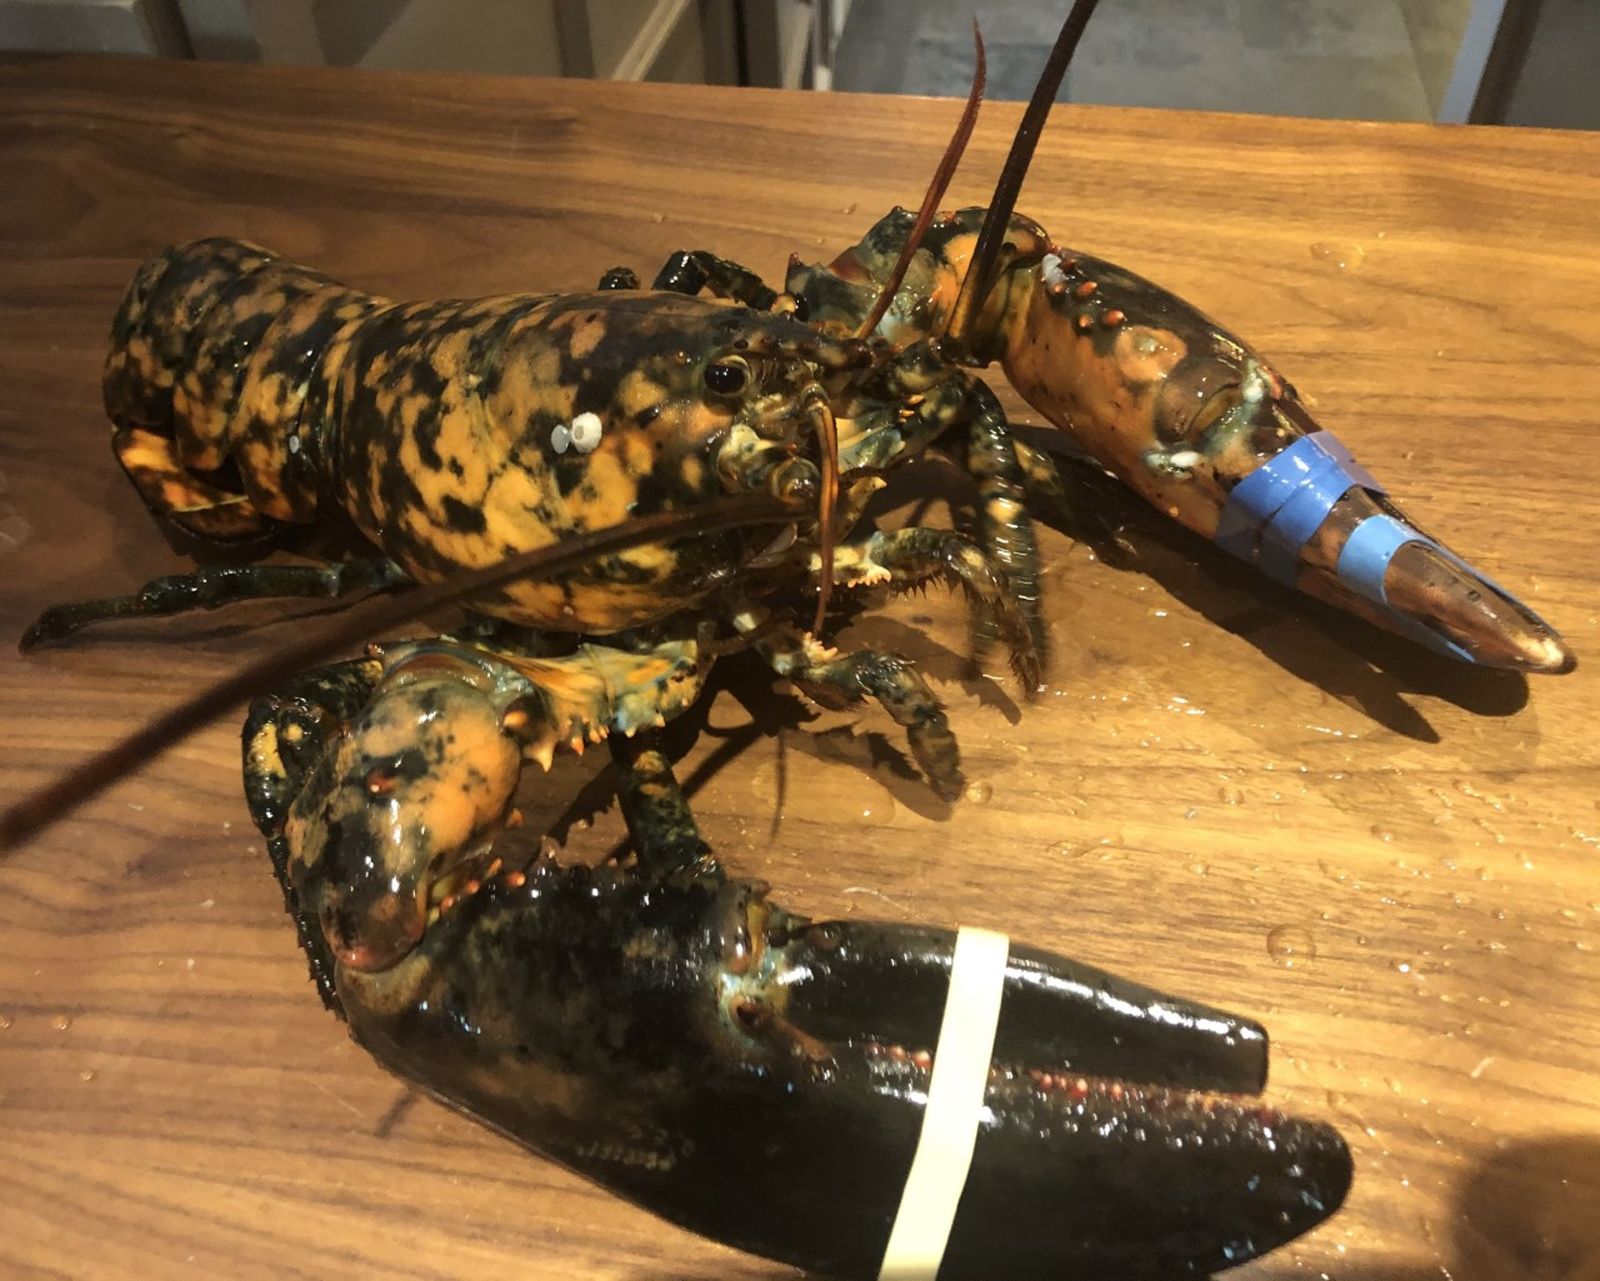 Rare Calico Lobster Turns Heads, And Escapes Dinner Menu : The Two-Way : NPR